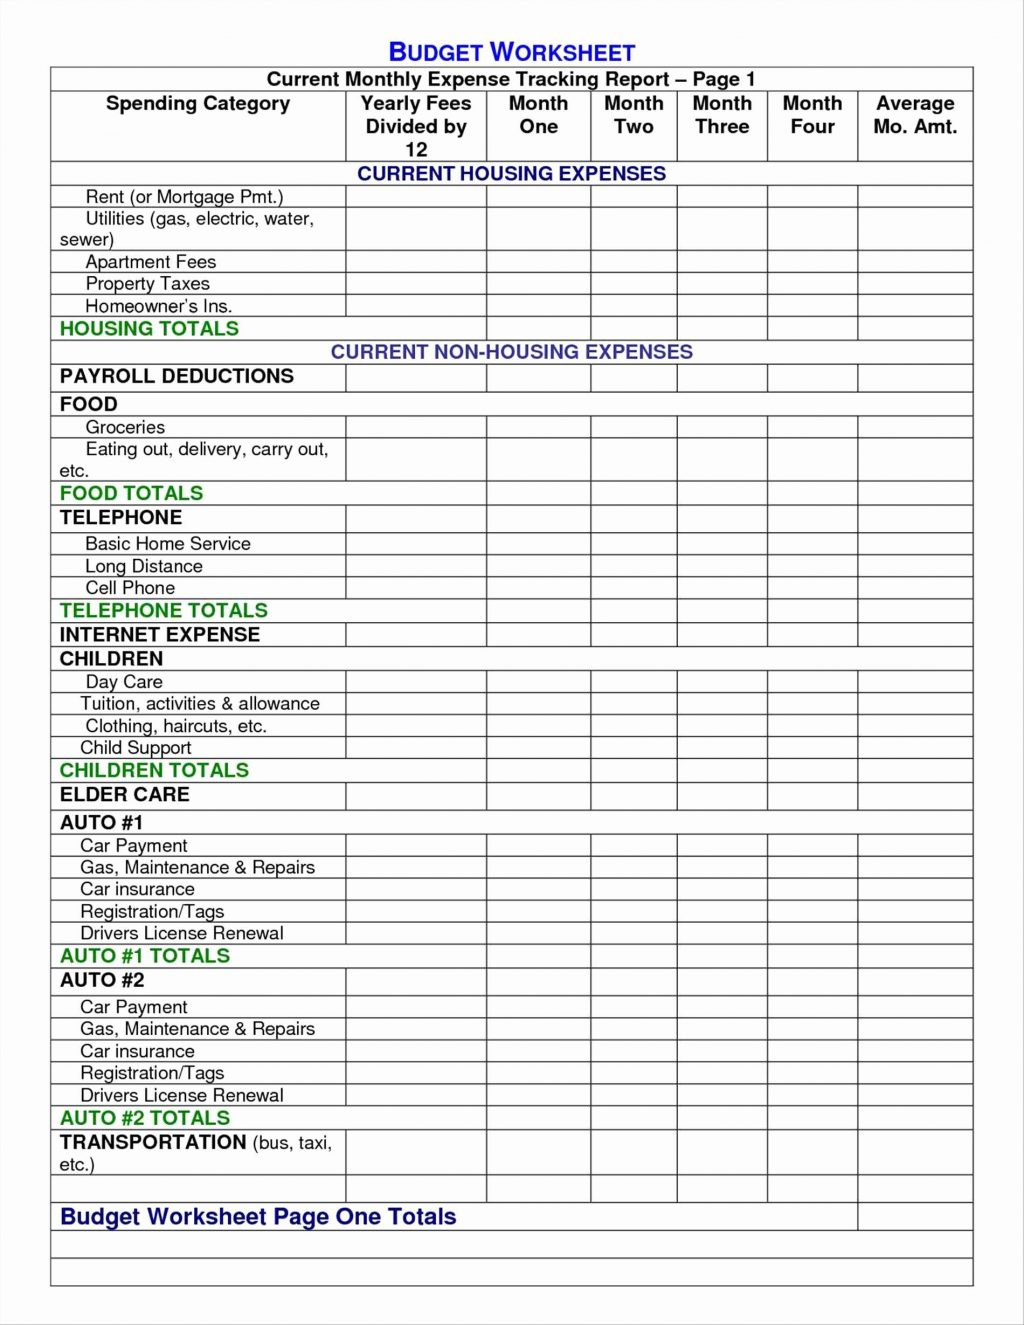 Sample Excel Spreadsheet For Small Business On Wedding Budget with Sample Budget Spreadsheet